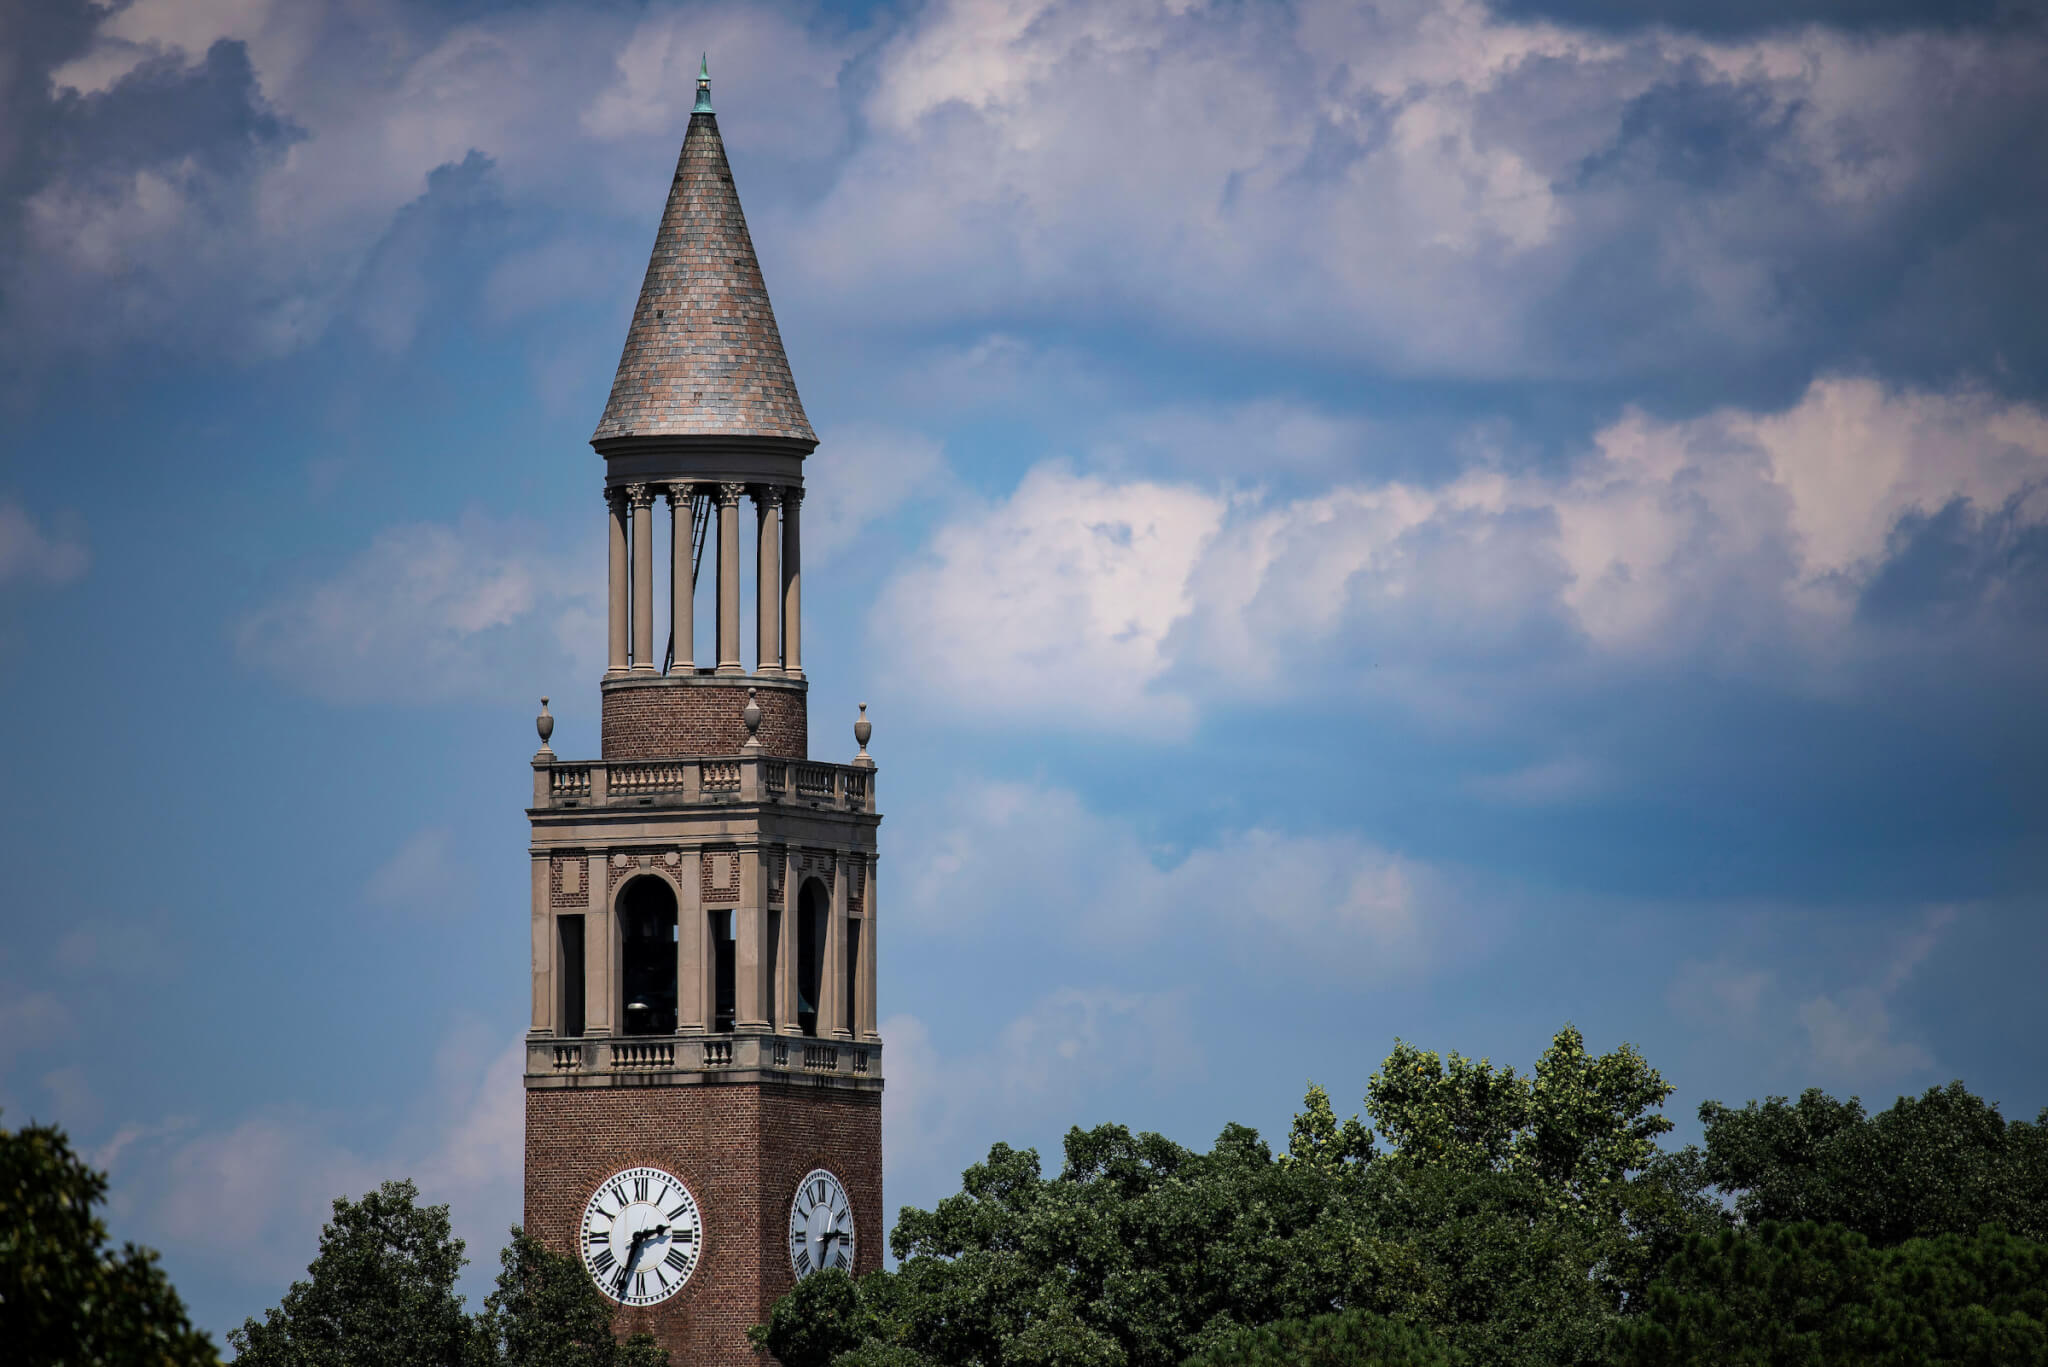 The top Morehead-Patterson Bell Tower set against a partially cloudy sky